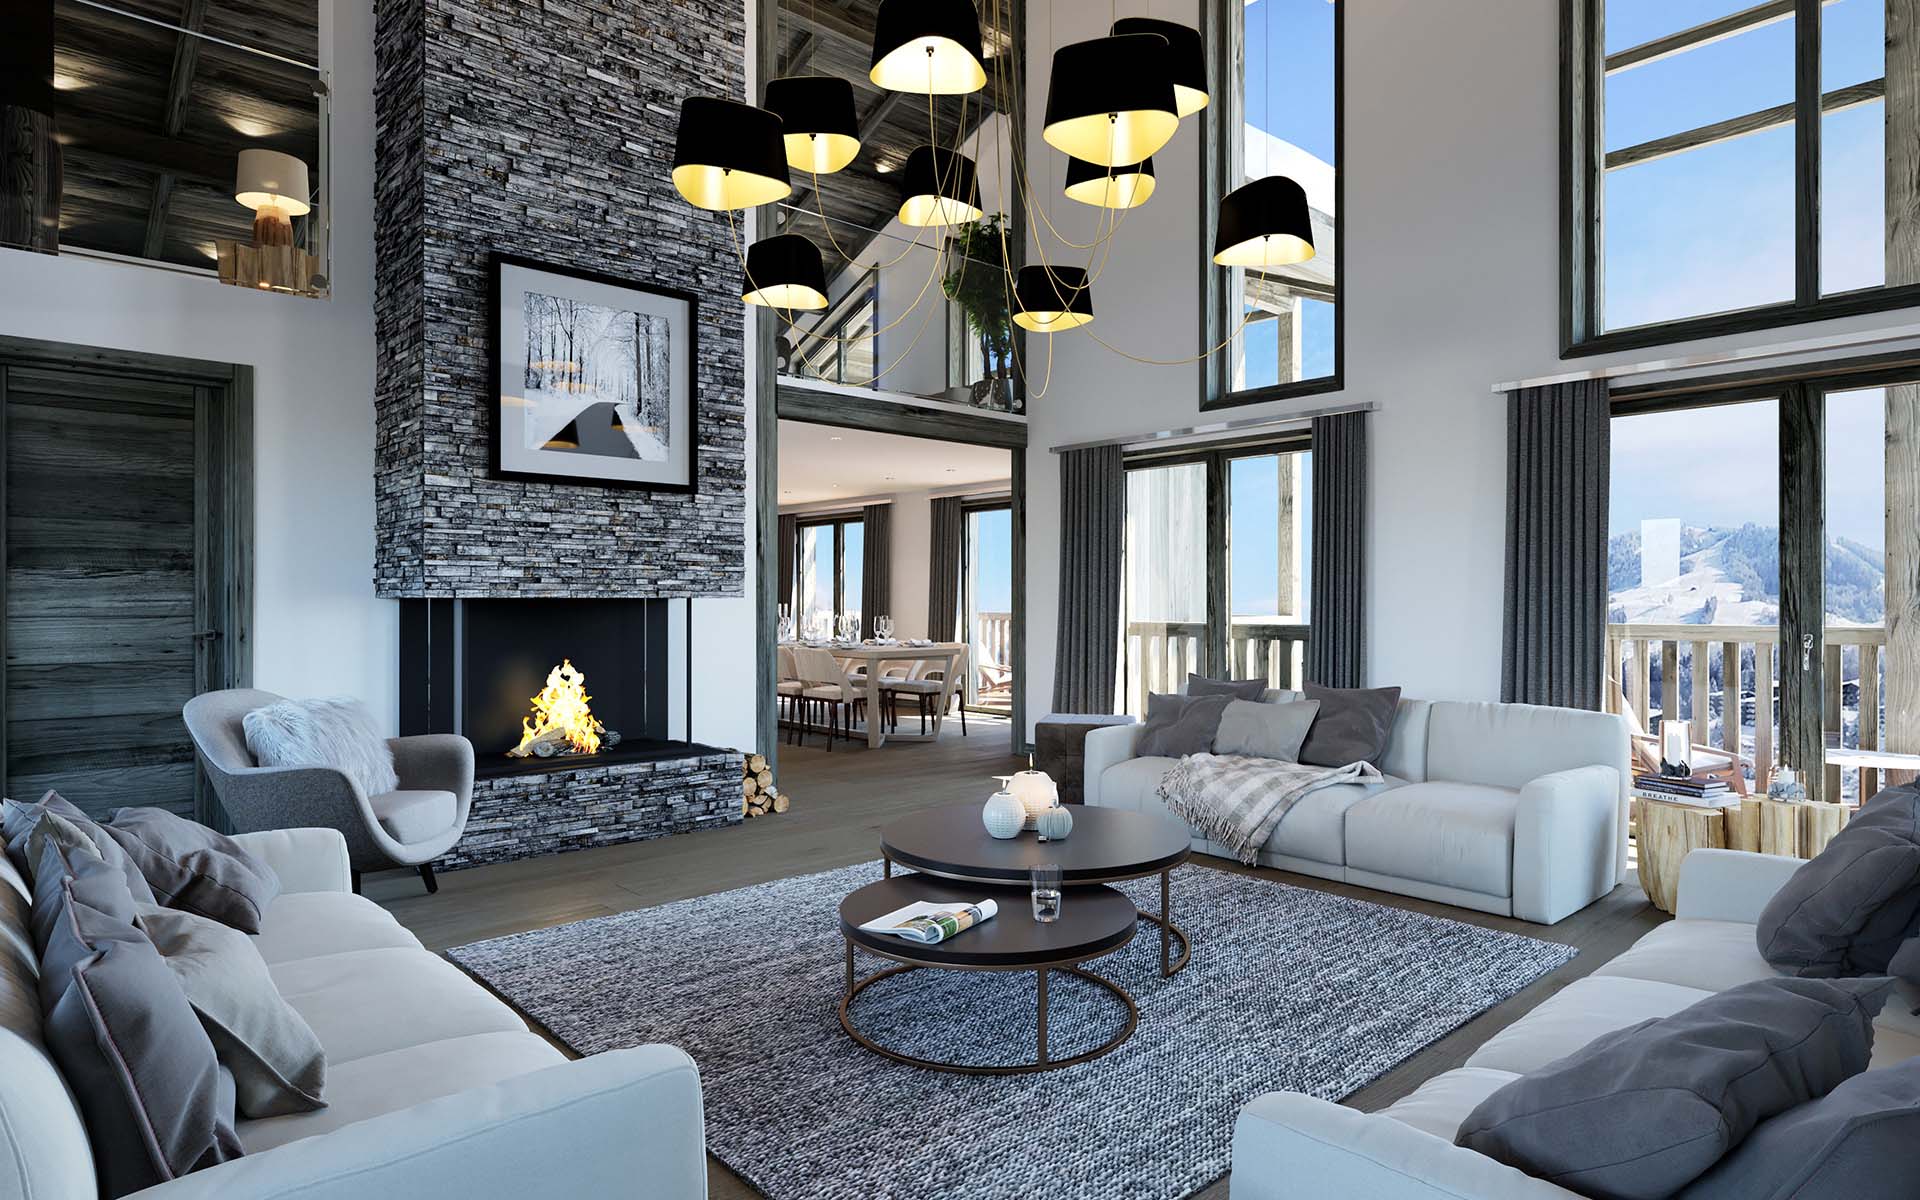 3D perspective of an apartment in Courchevel produced by the 3D creative agency Valentin Studio.